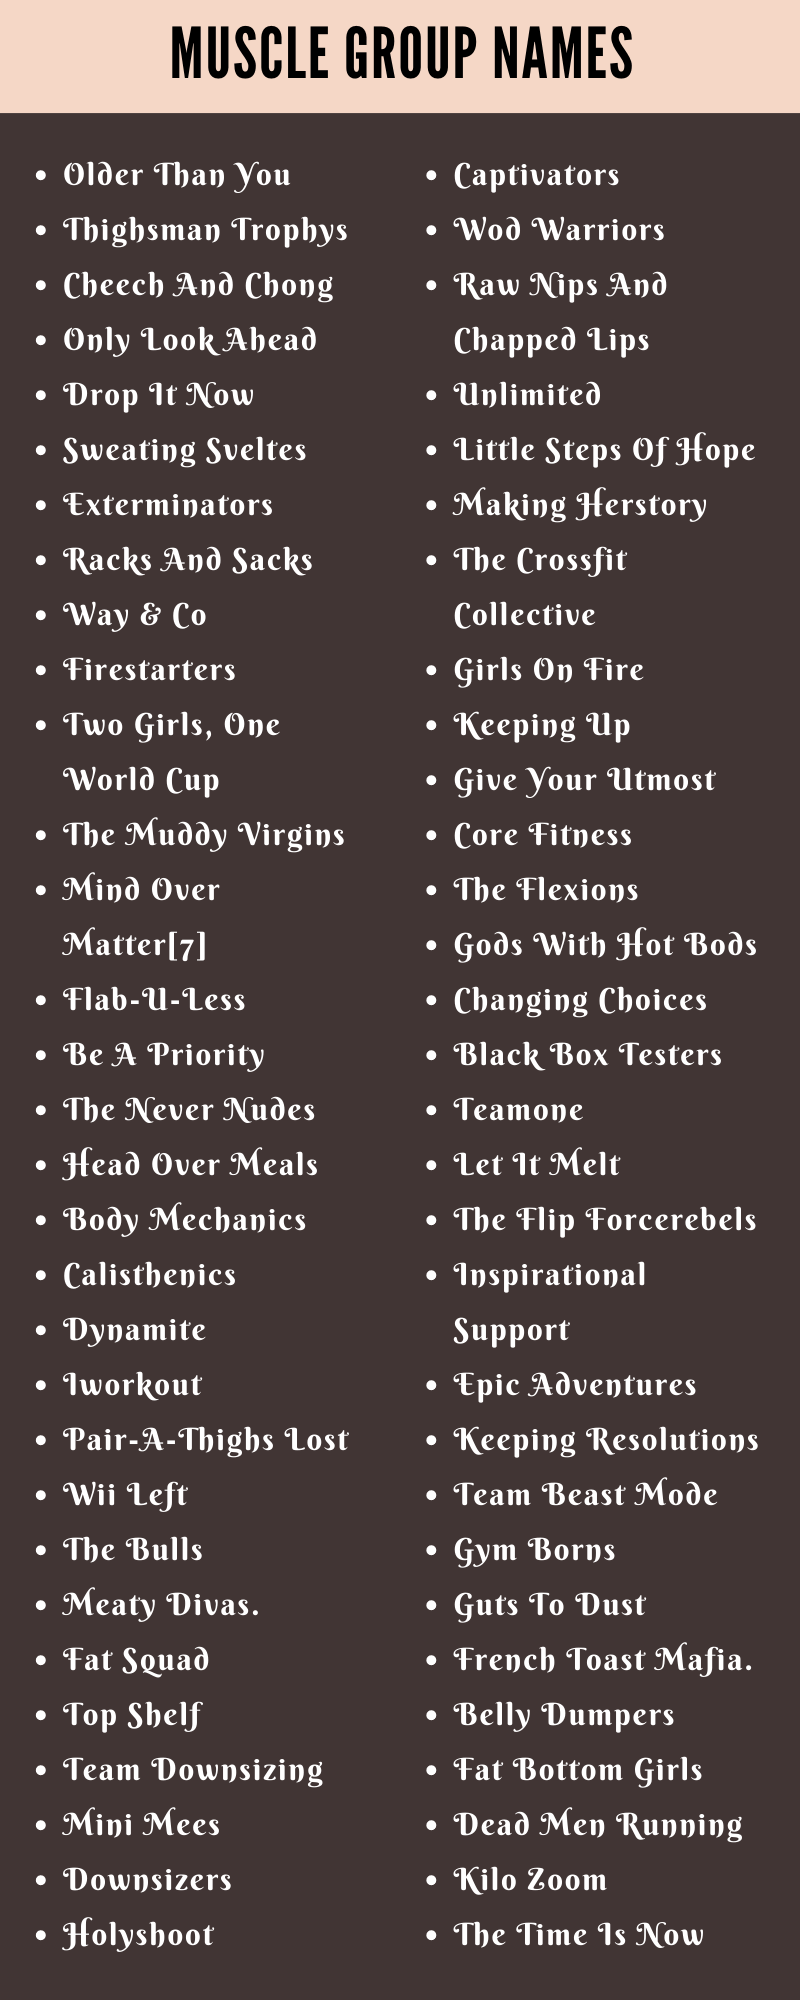 Muscle Group Names